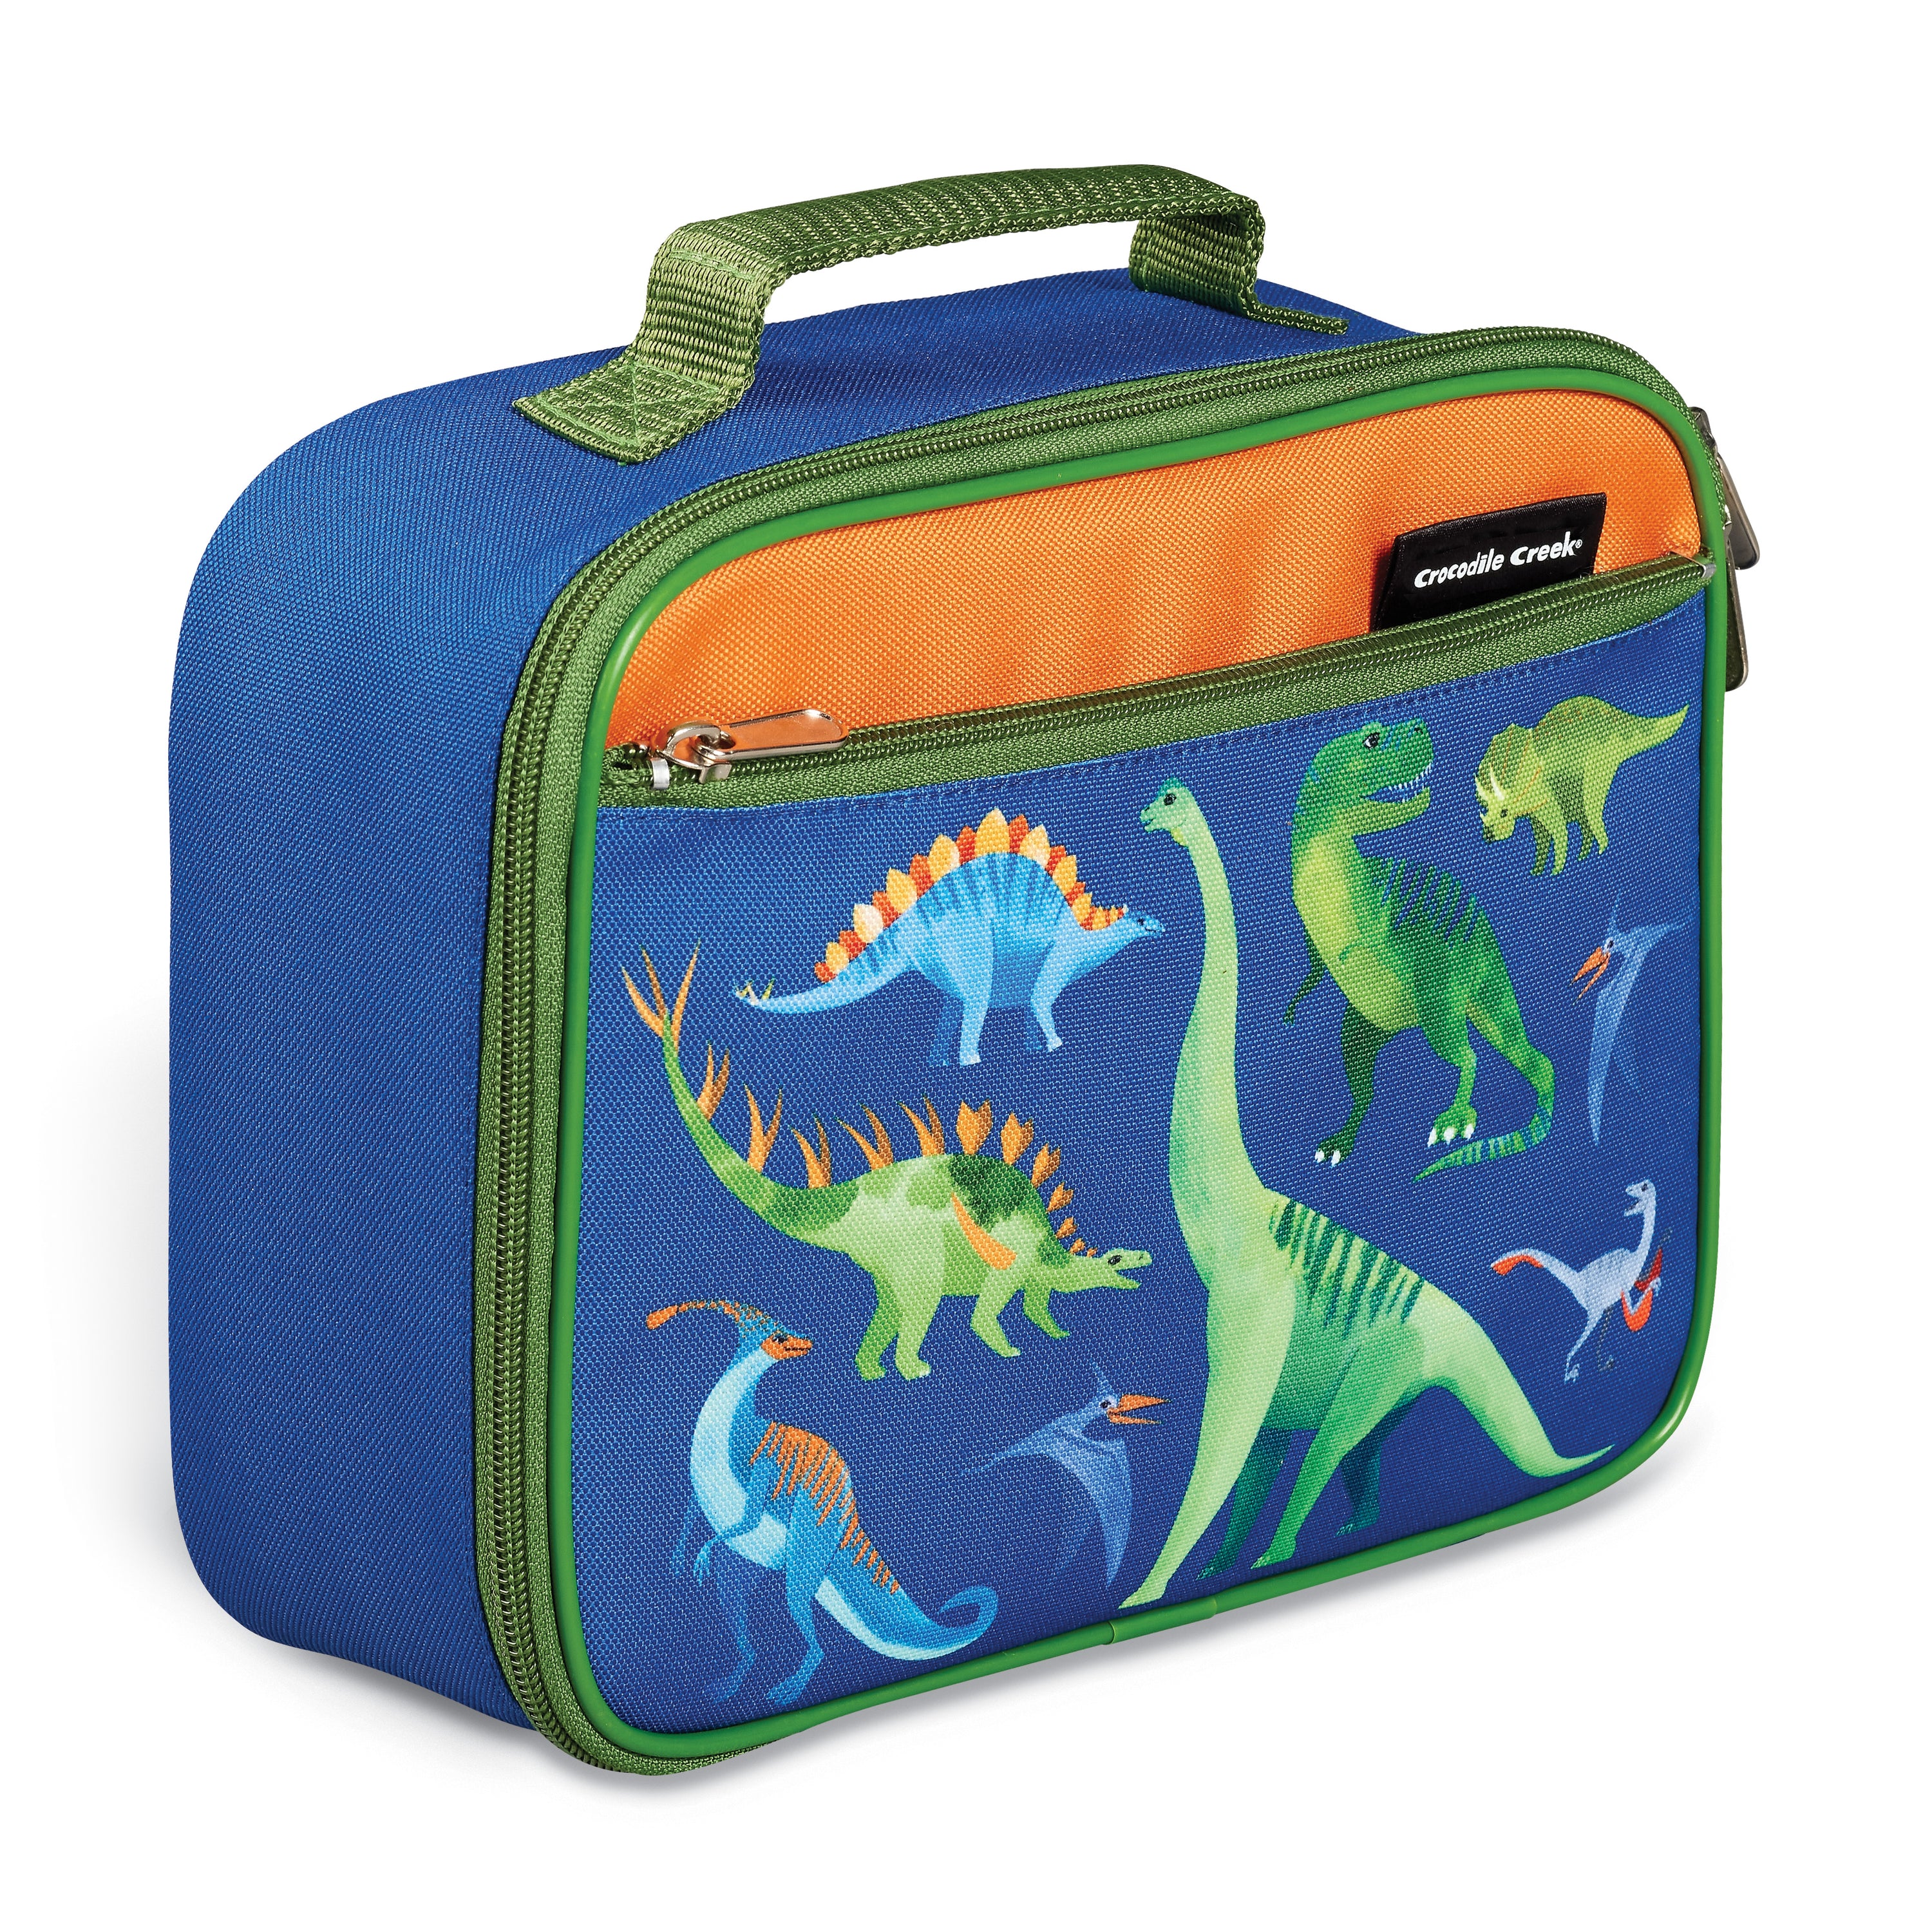 Lunch Box Lunch Box Discovery Exploration Dinosaur Continent N5800100// Lid